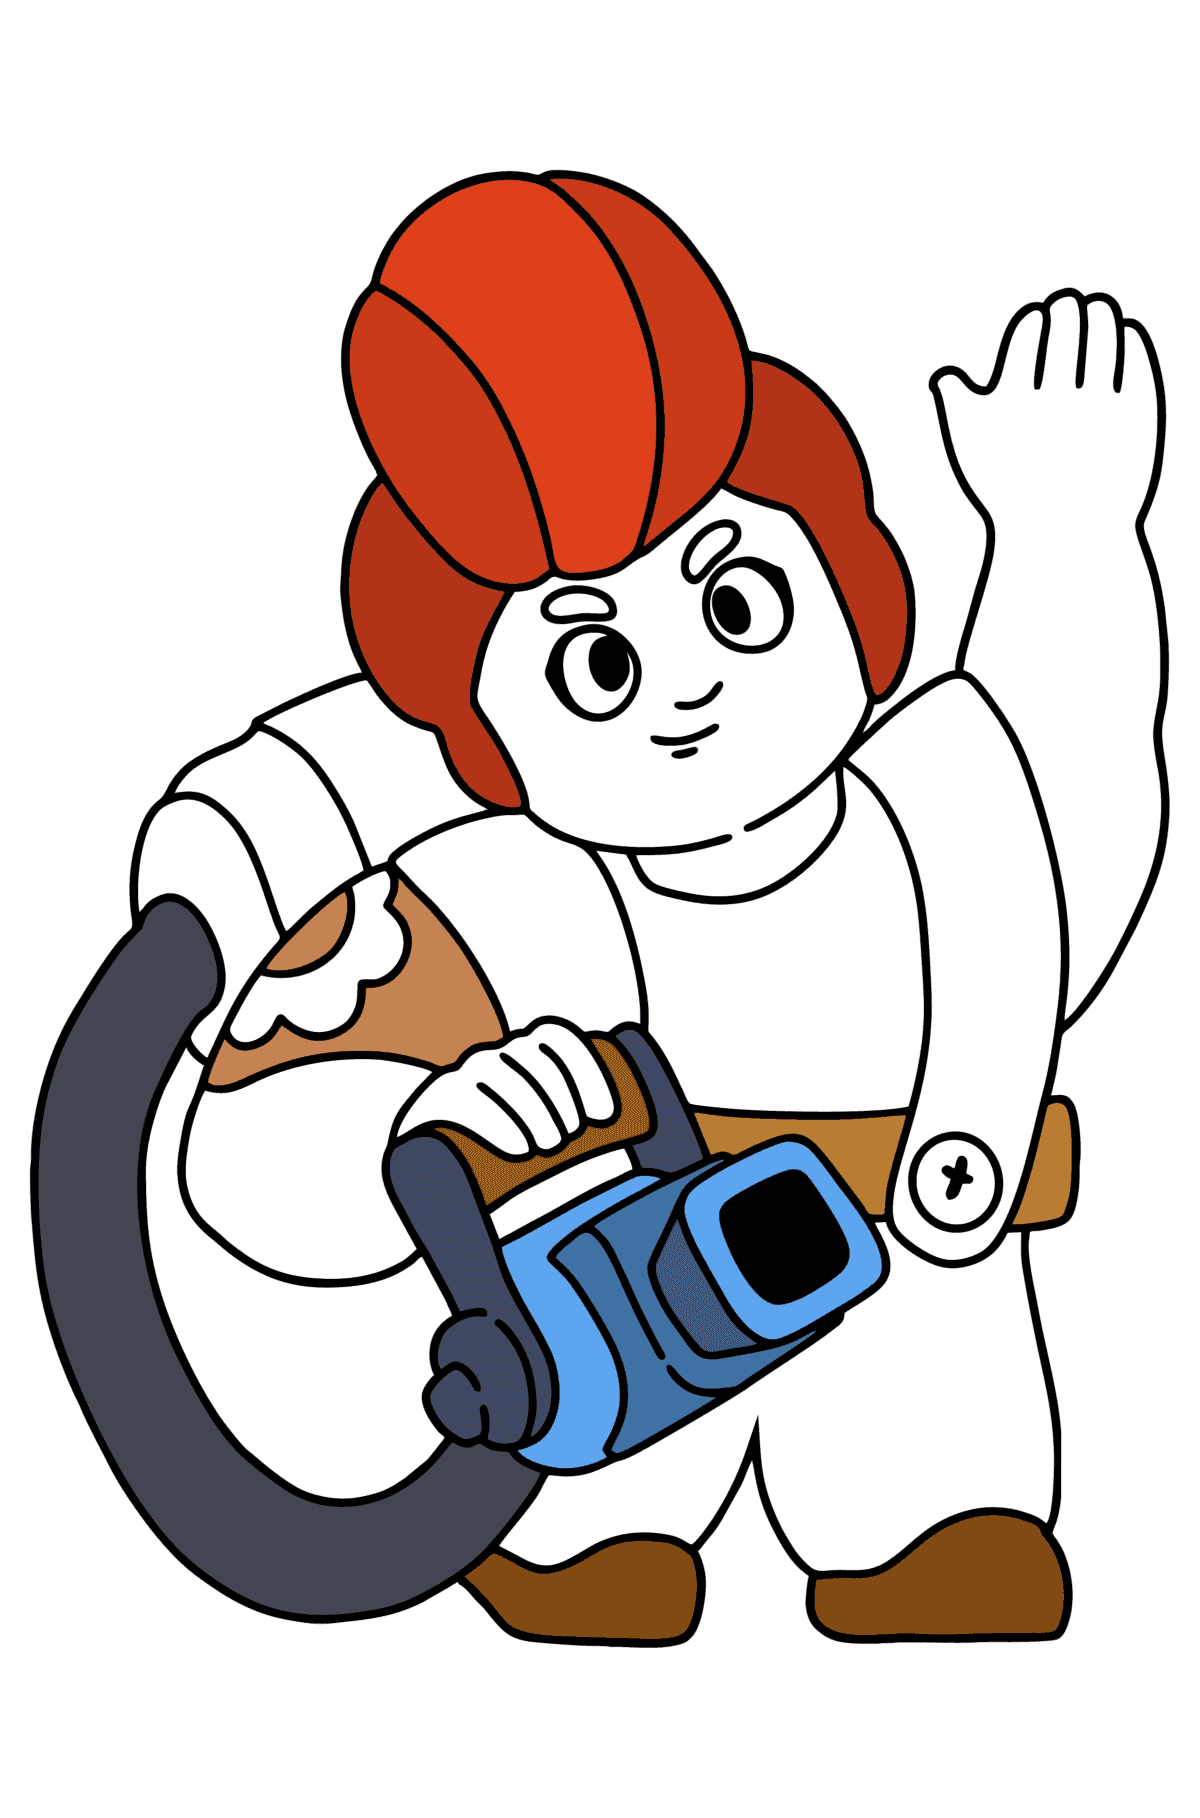 Brawl Stars Pam coloring page - Coloring Pages for Kids